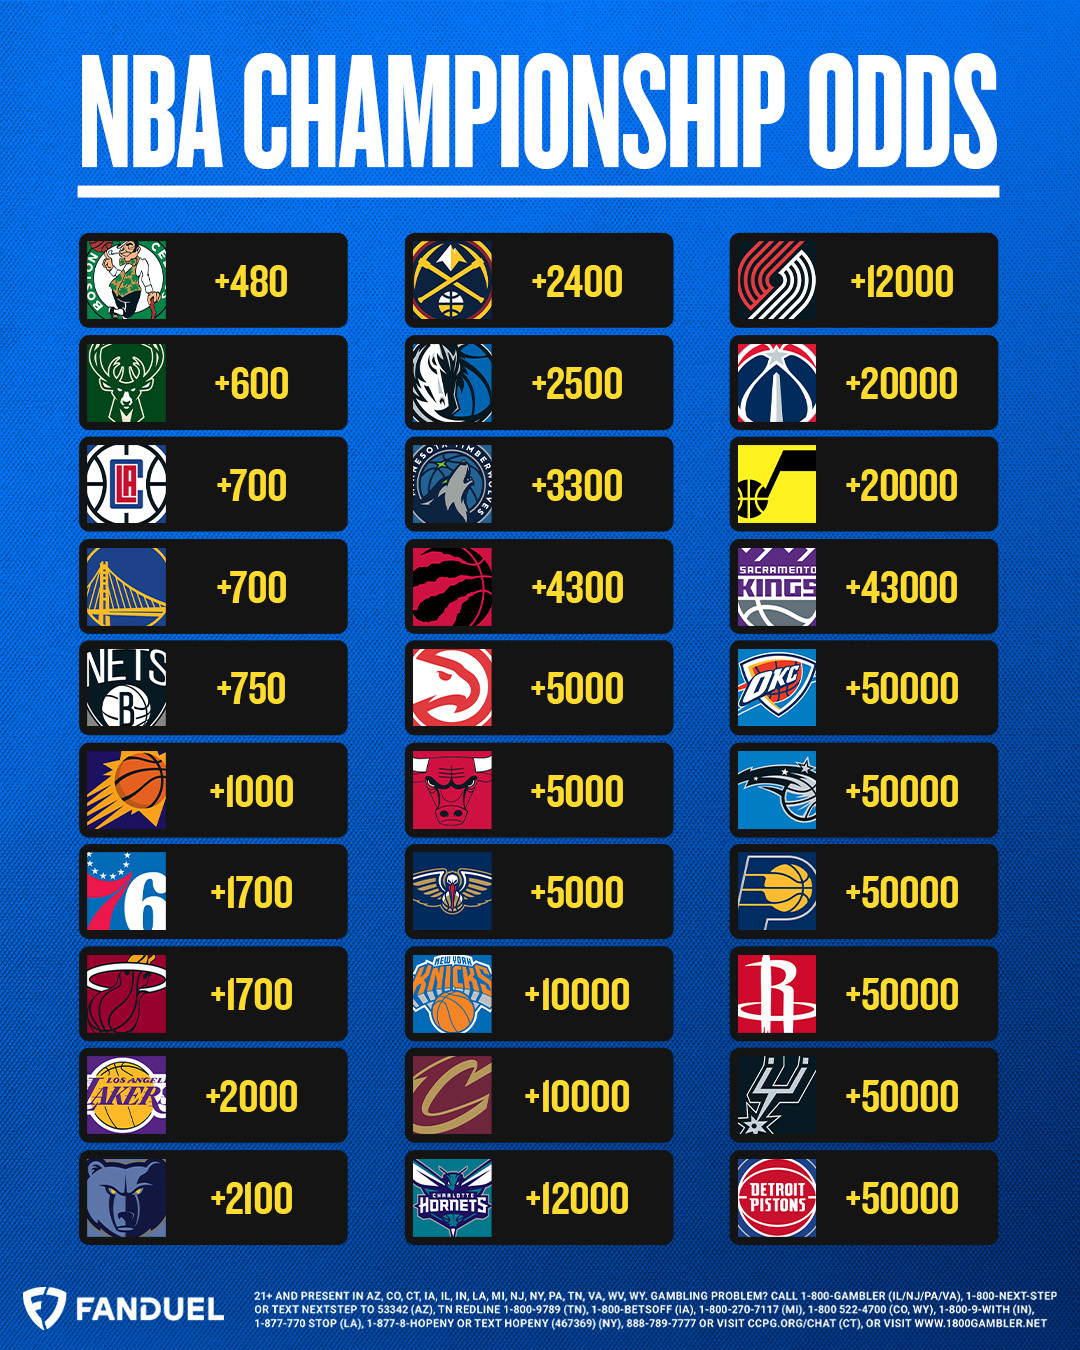 Sportsbook on Twitter: "Latest NBA Championship Odds Any teams that stand out? 🤔 https://t.co/6Ix6UFYF6F" /